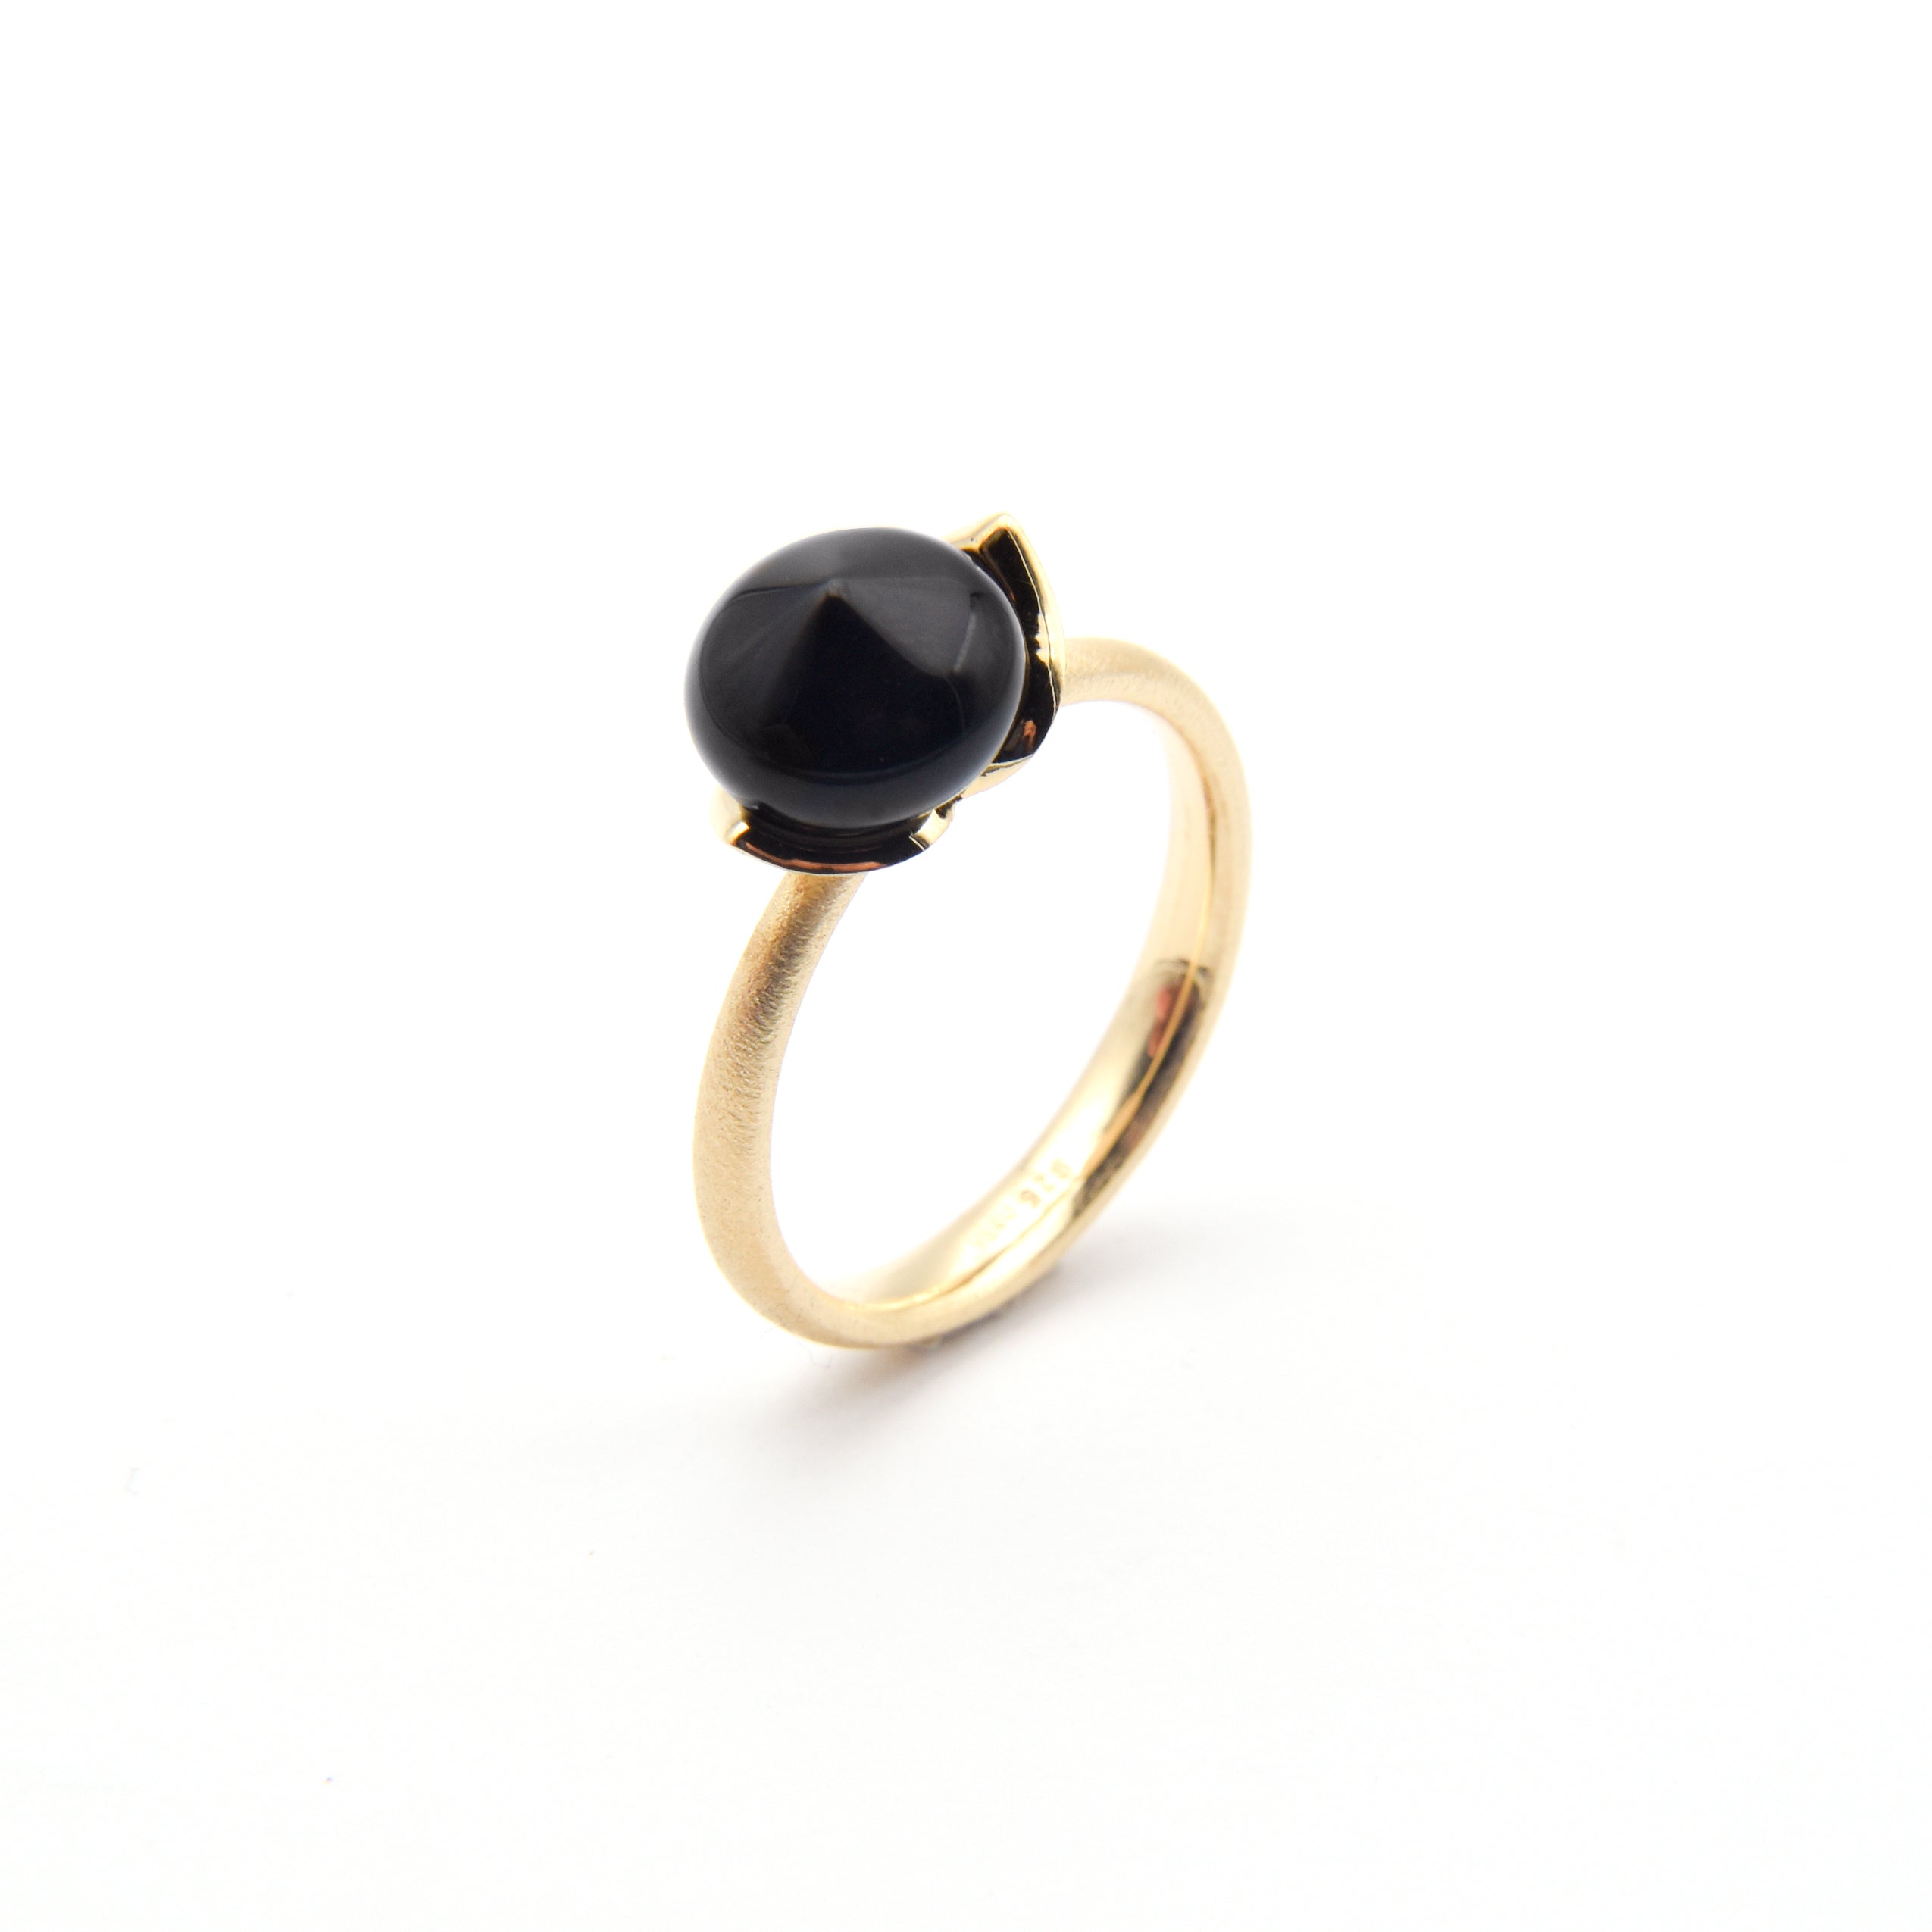 Dolce ring "smal" with Onix 925/-